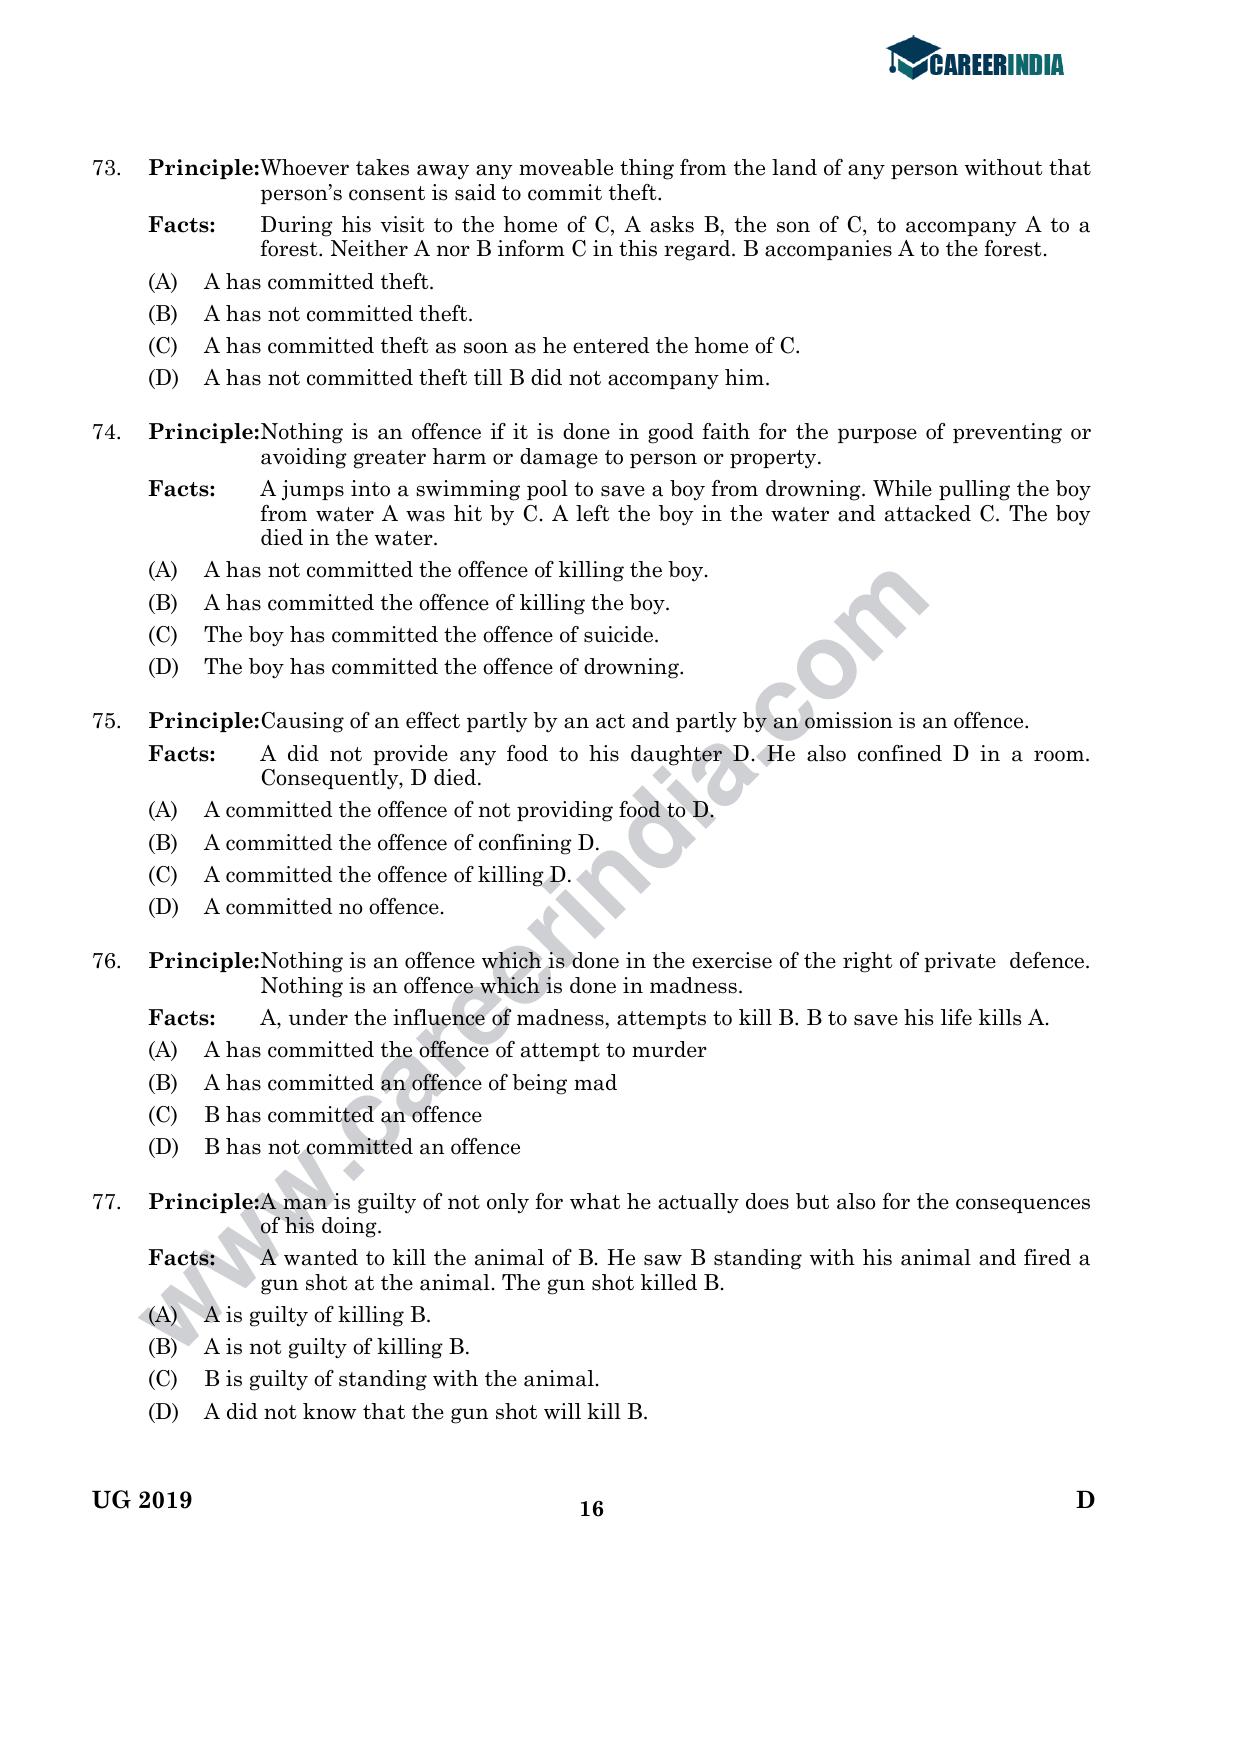 CLAT 2019 UG Logical-Reasoning Question Paper - Page 15